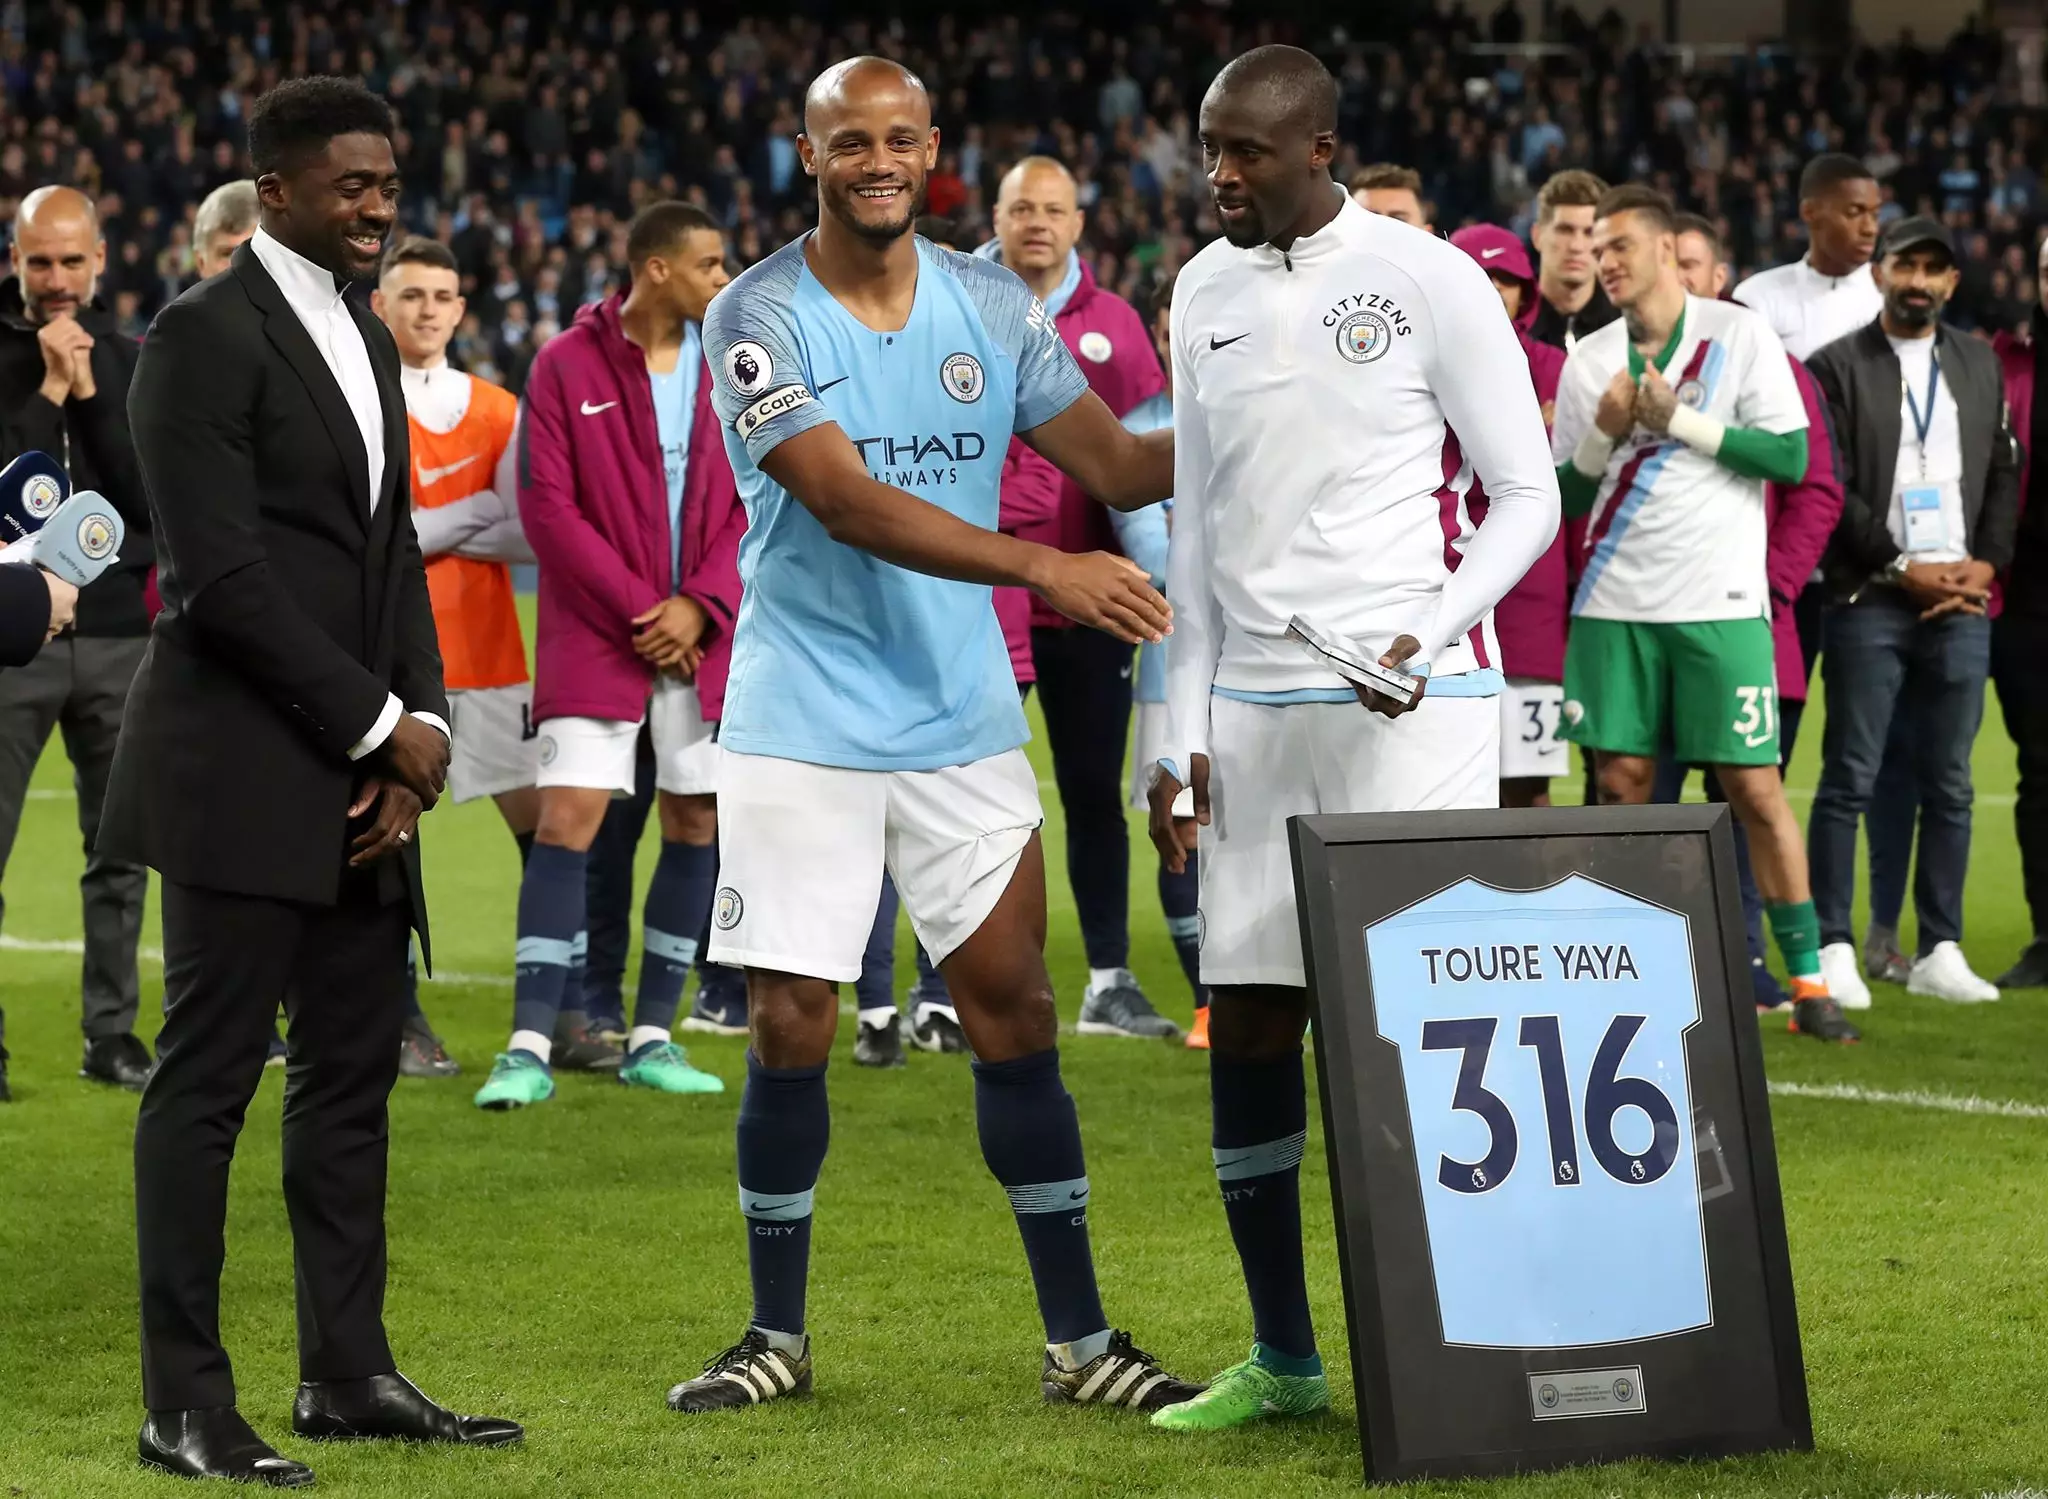 Toure was given a good send off by City. Image: PA Images